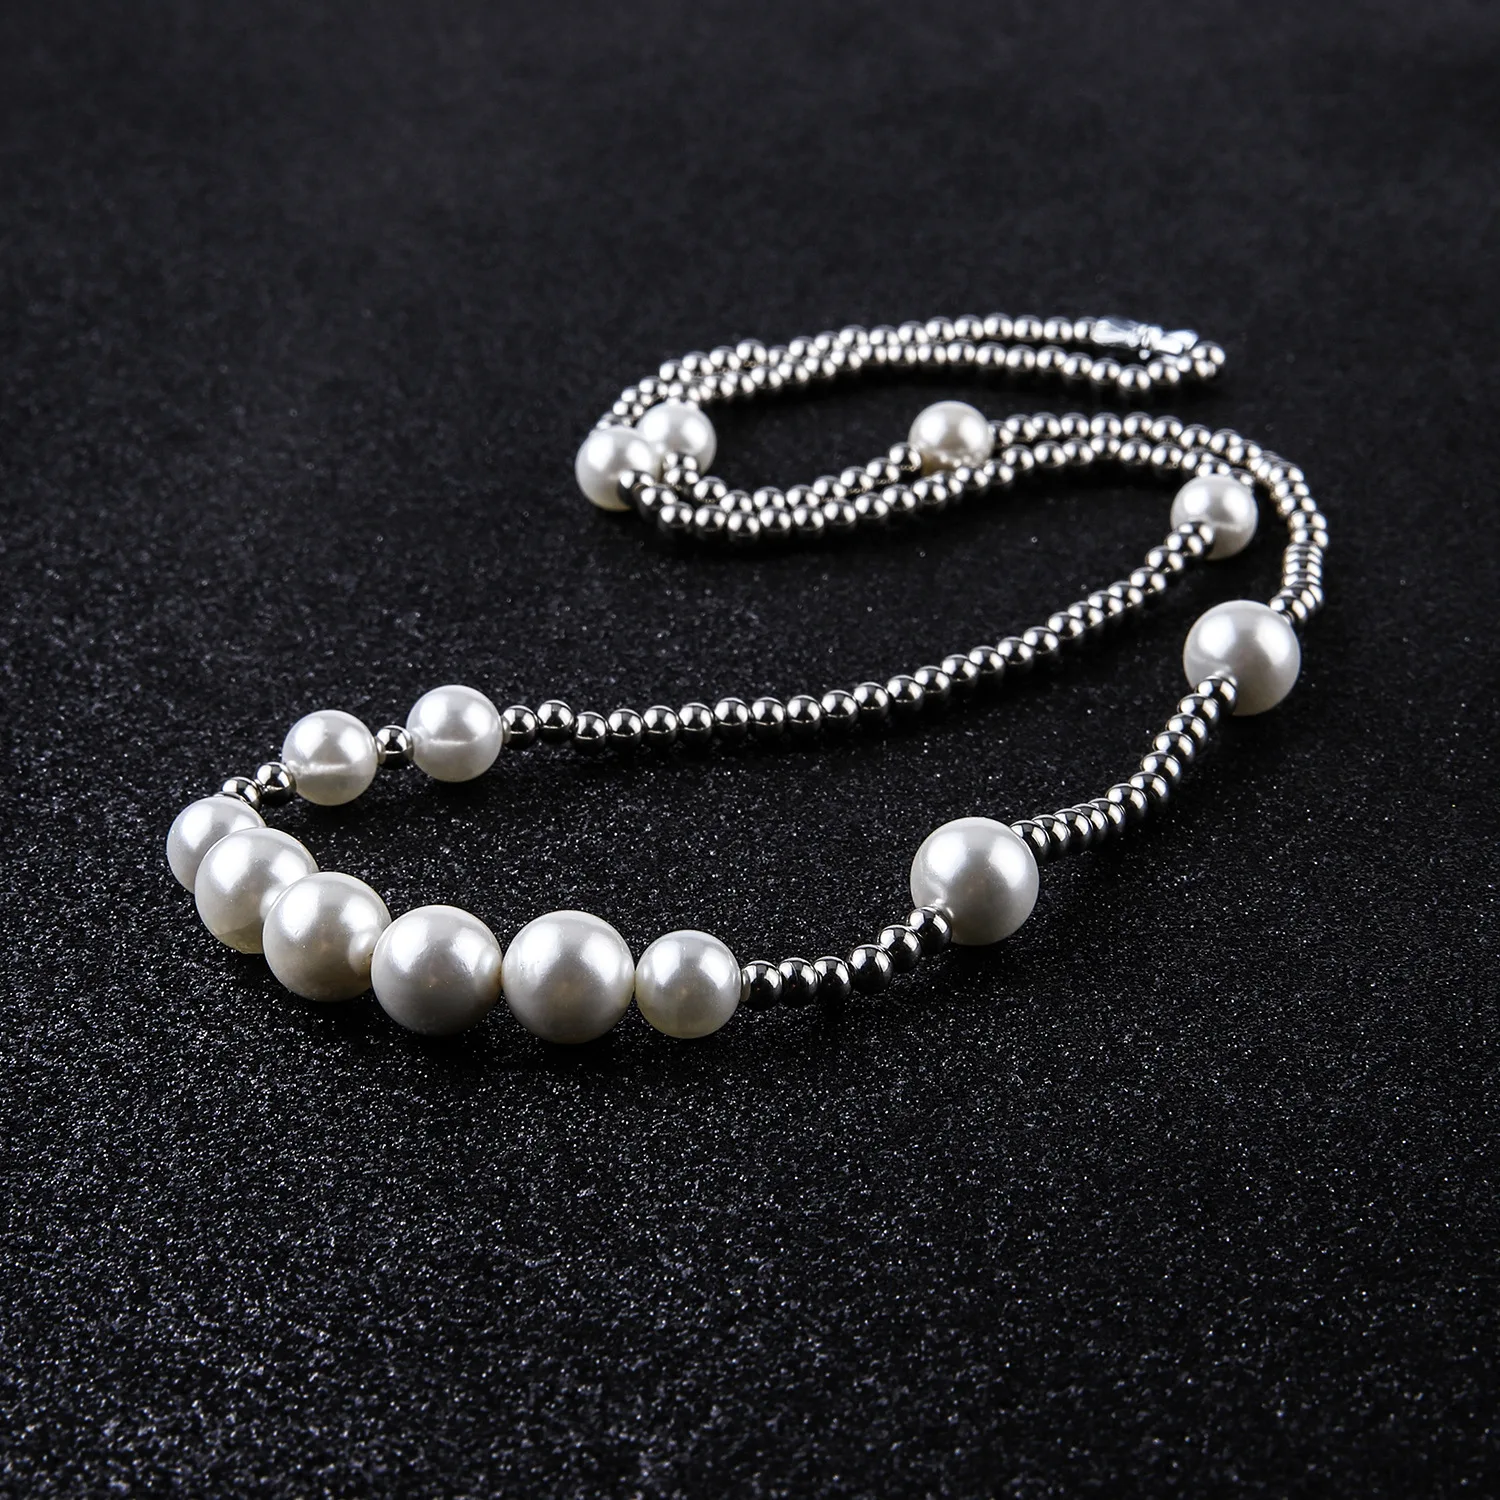 New Pearl Necklace Stainless Steel Ball Stitching Necklace,Hip-hop ...